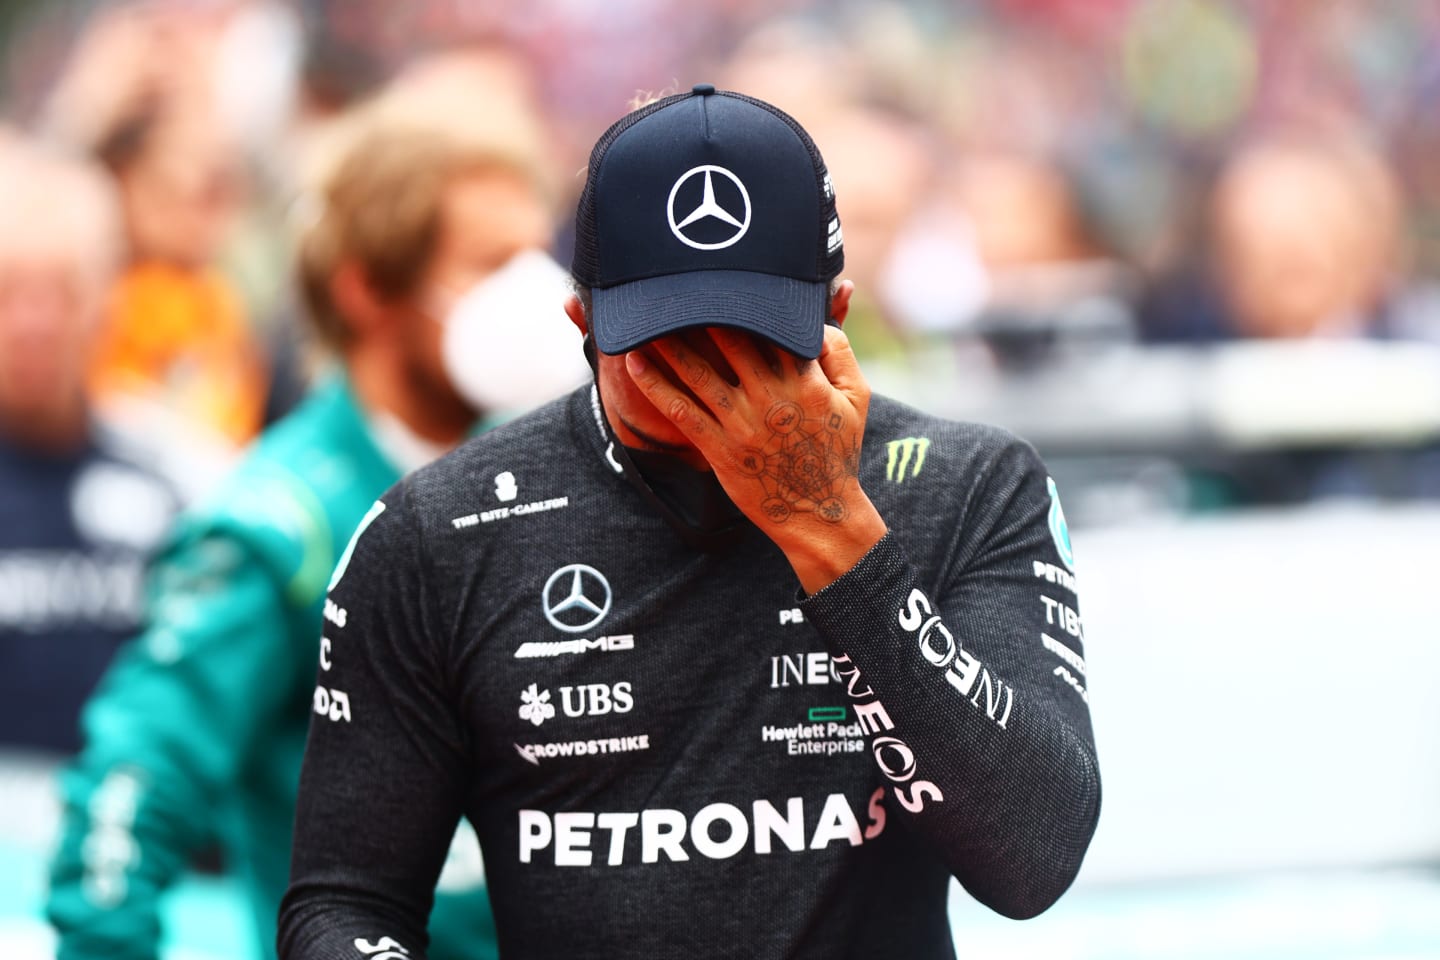 IMOLA, ITALY - APRIL 24: Lewis Hamilton of Great Britain and Mercedes wipes his face on the grid